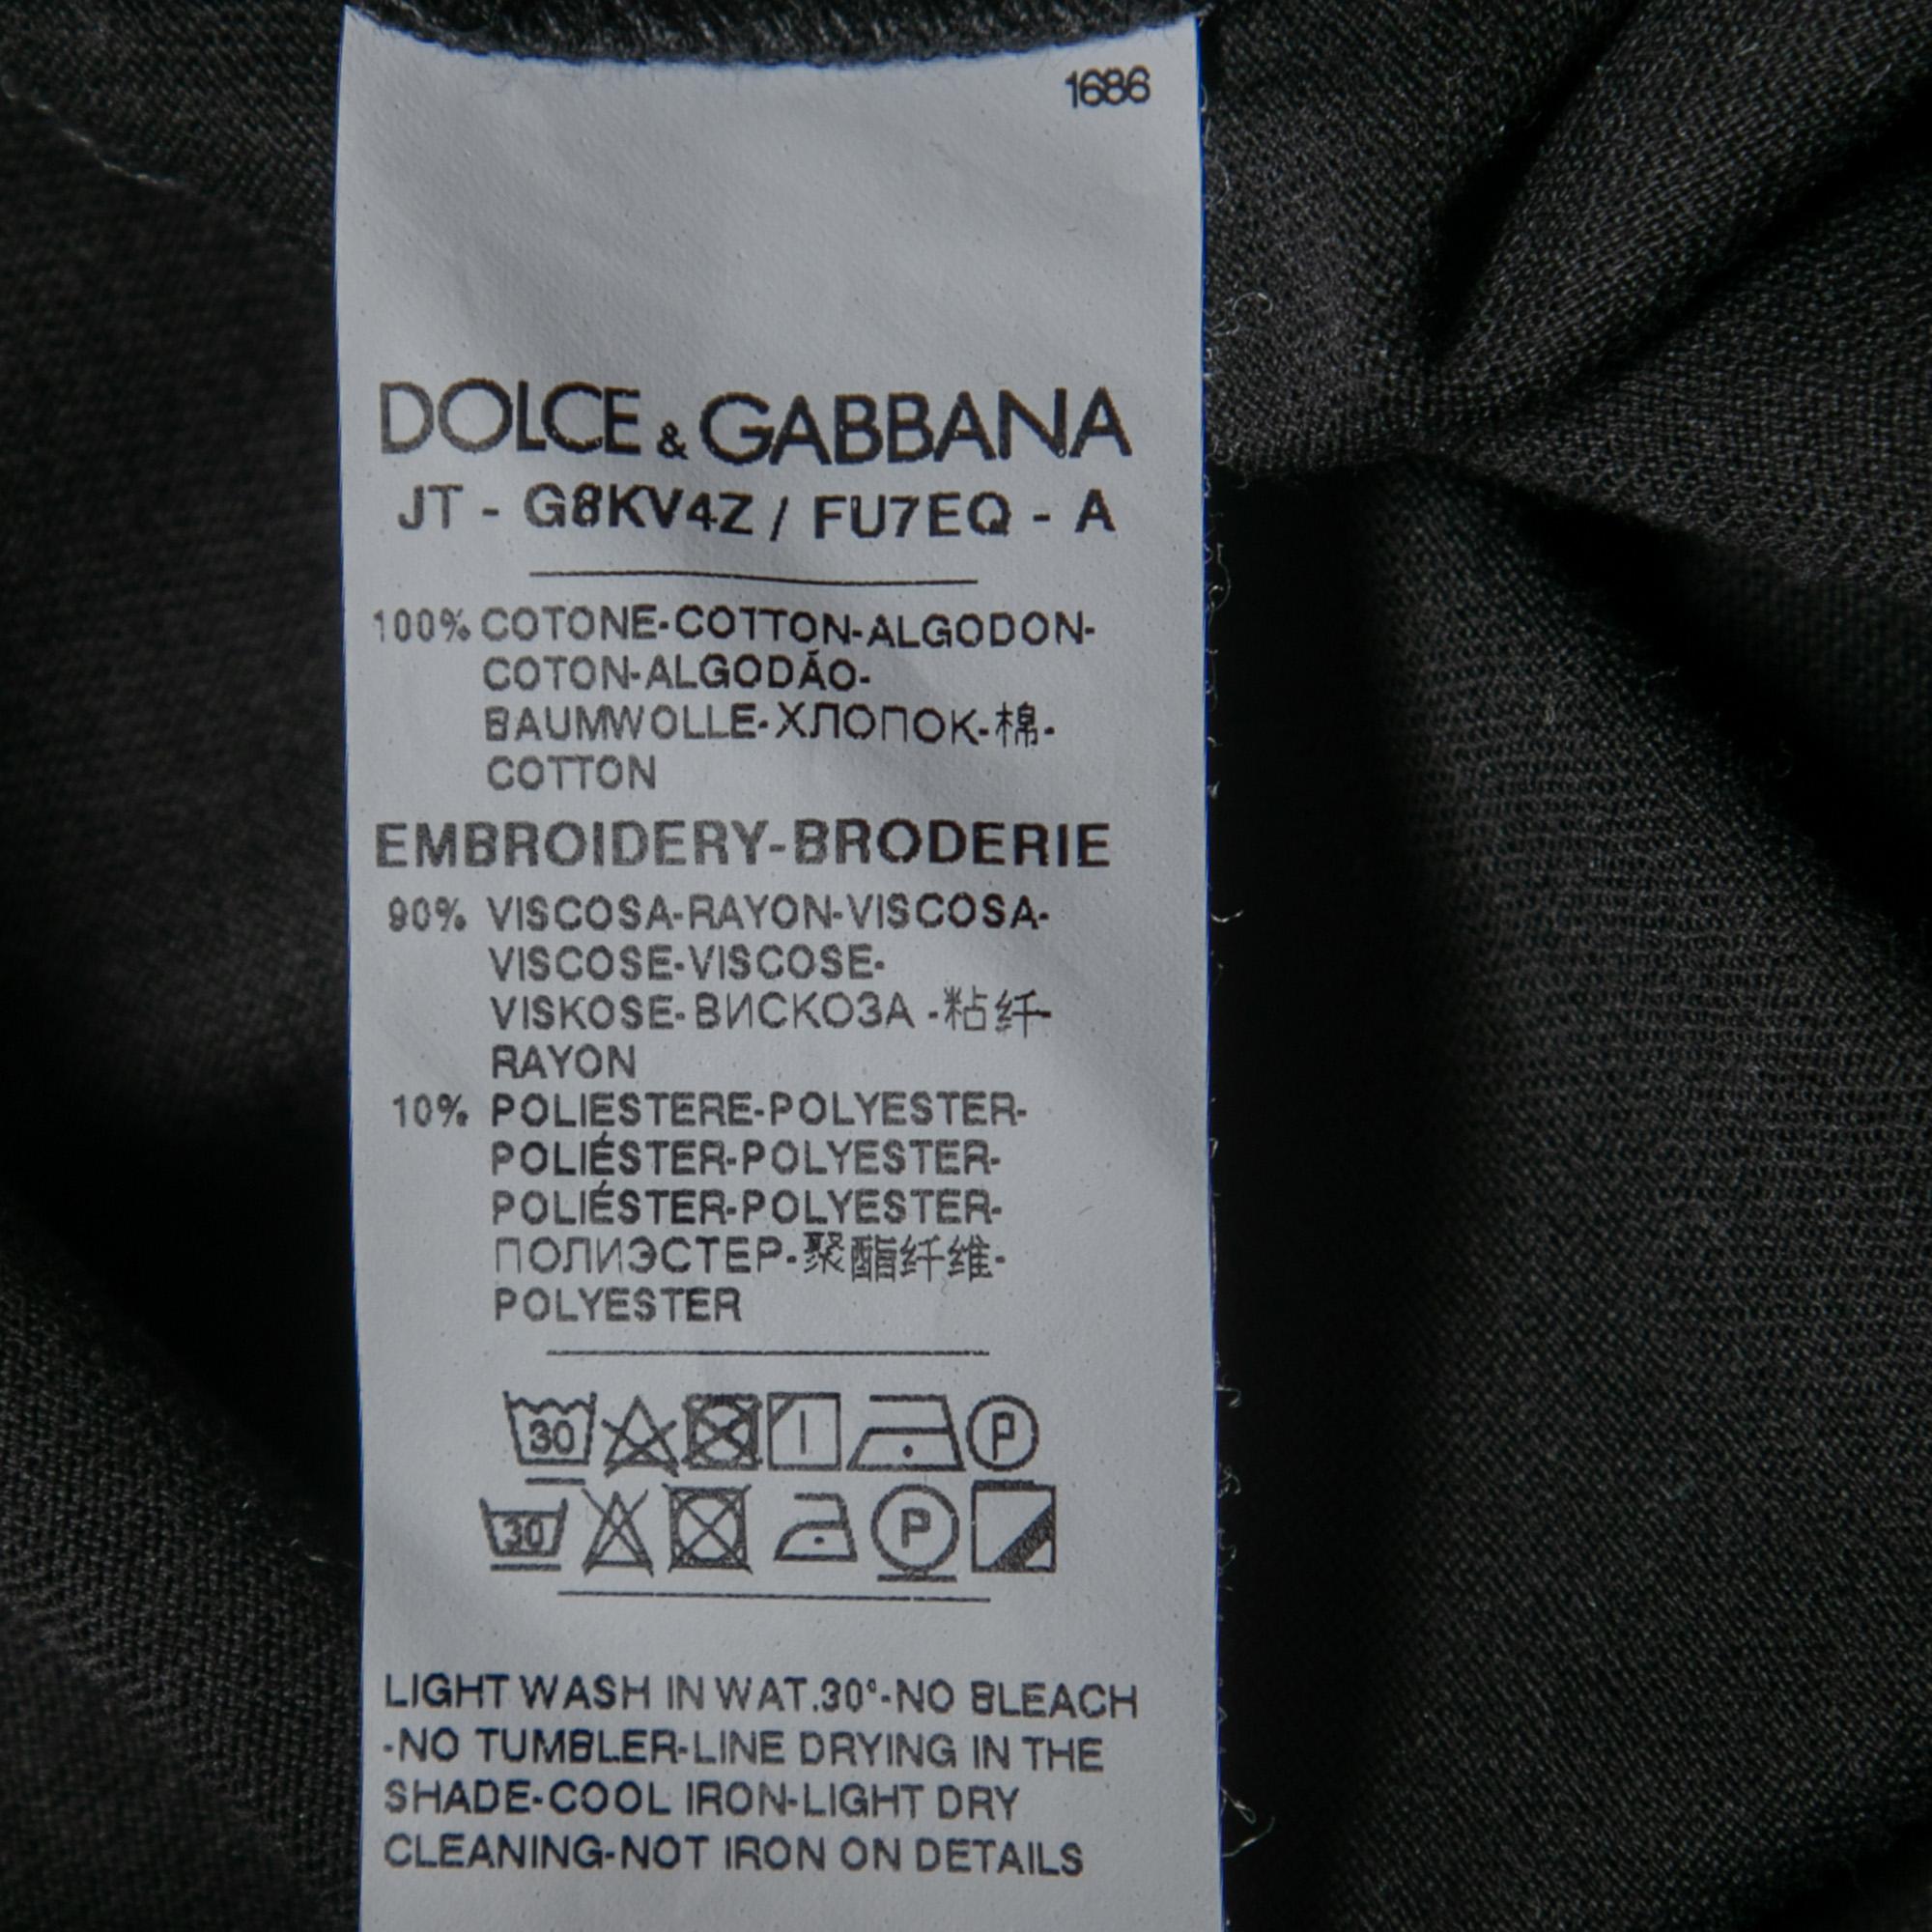 Dolce & Gabbana brings you a simple t-shirt elevated by a DG Since 1984 print. It has been tailored from a cotton blend in a black shade and features short sleeves. Style the creation with sneakers and denim pants for a cool and casual look.

